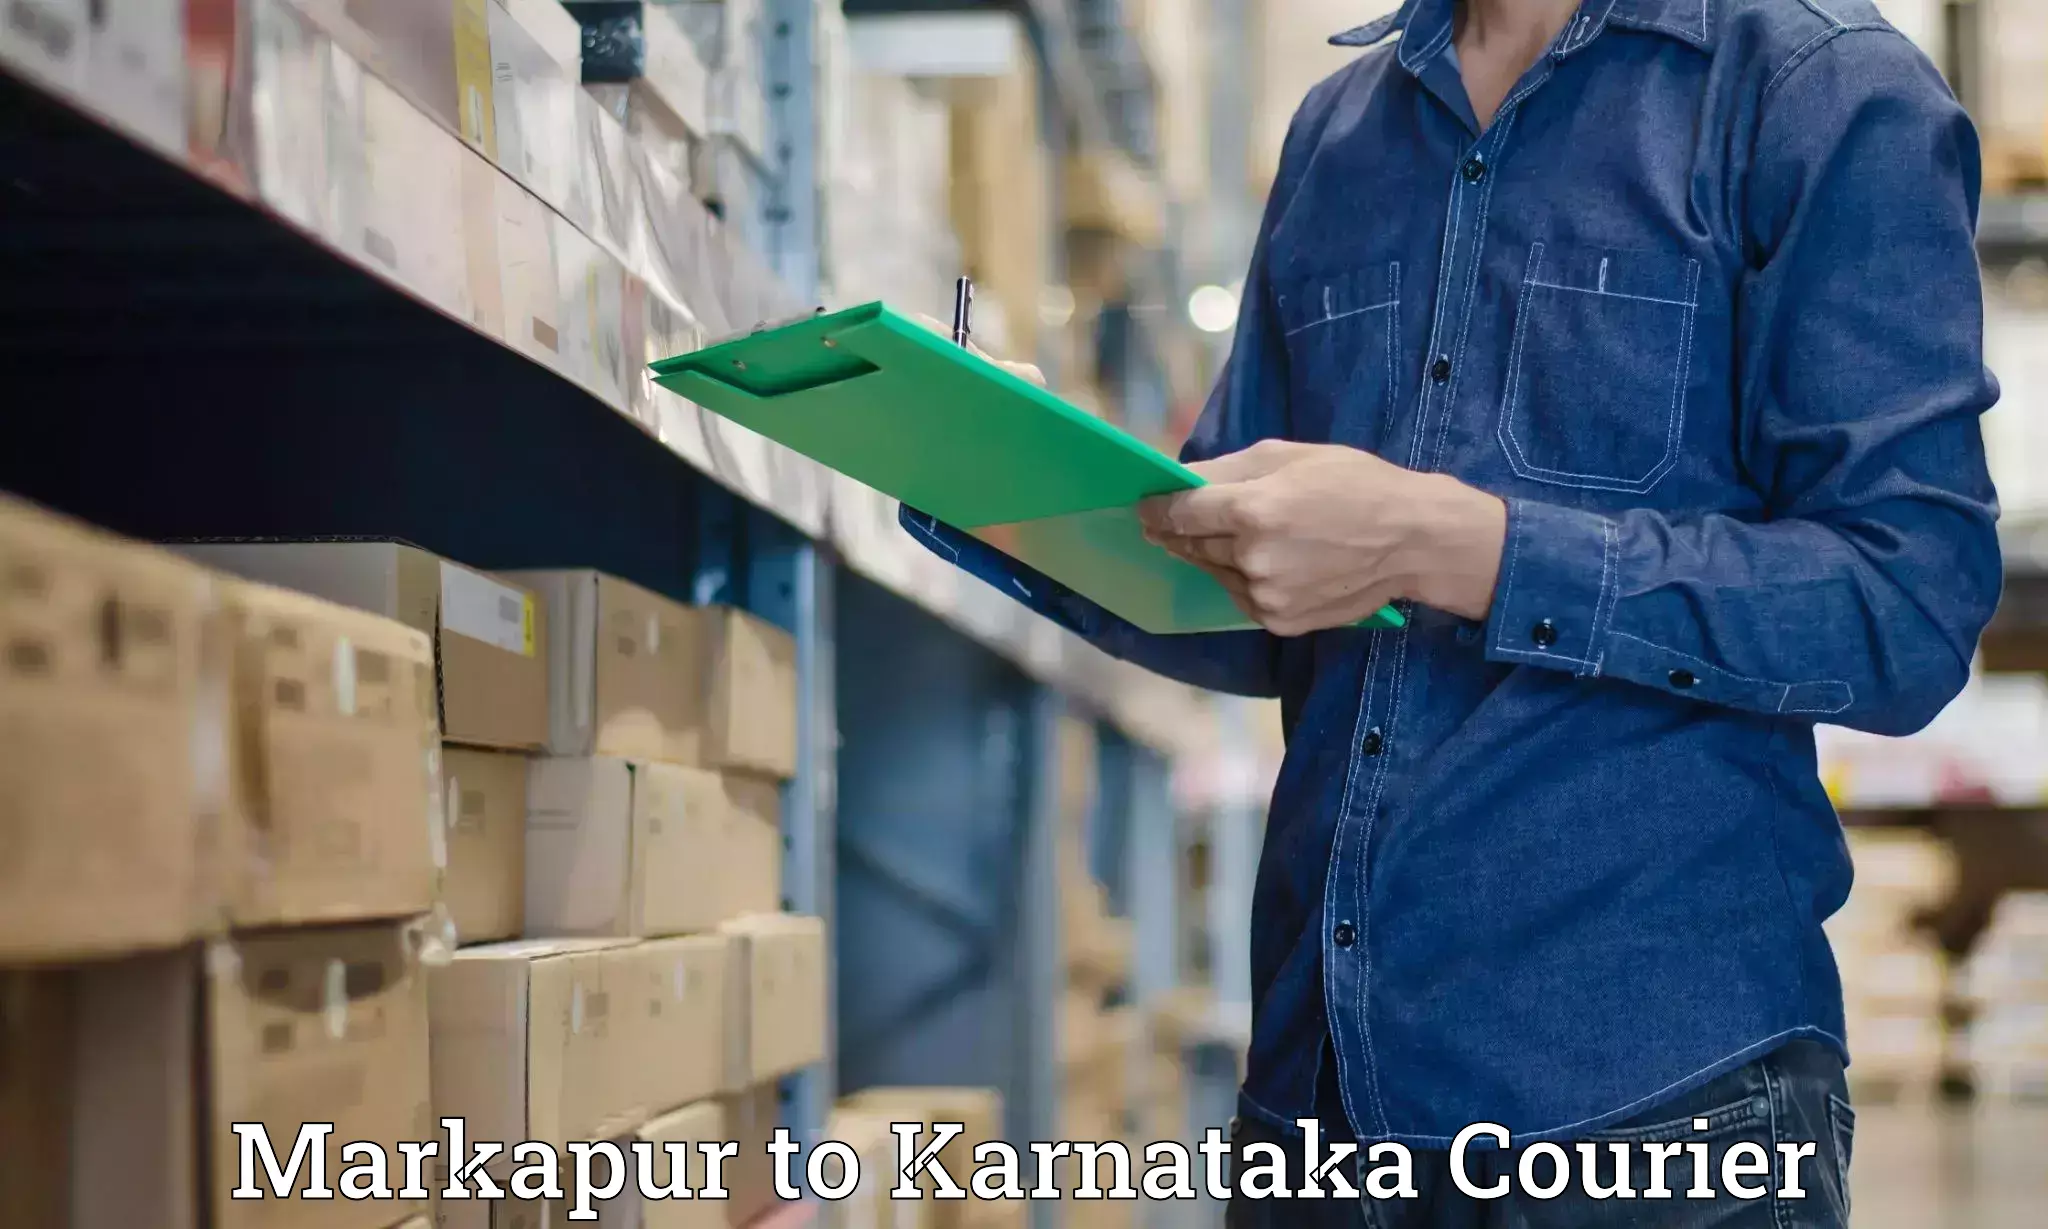 Cargo delivery service Markapur to KLE Academy of Higher Education and Research Belagavi